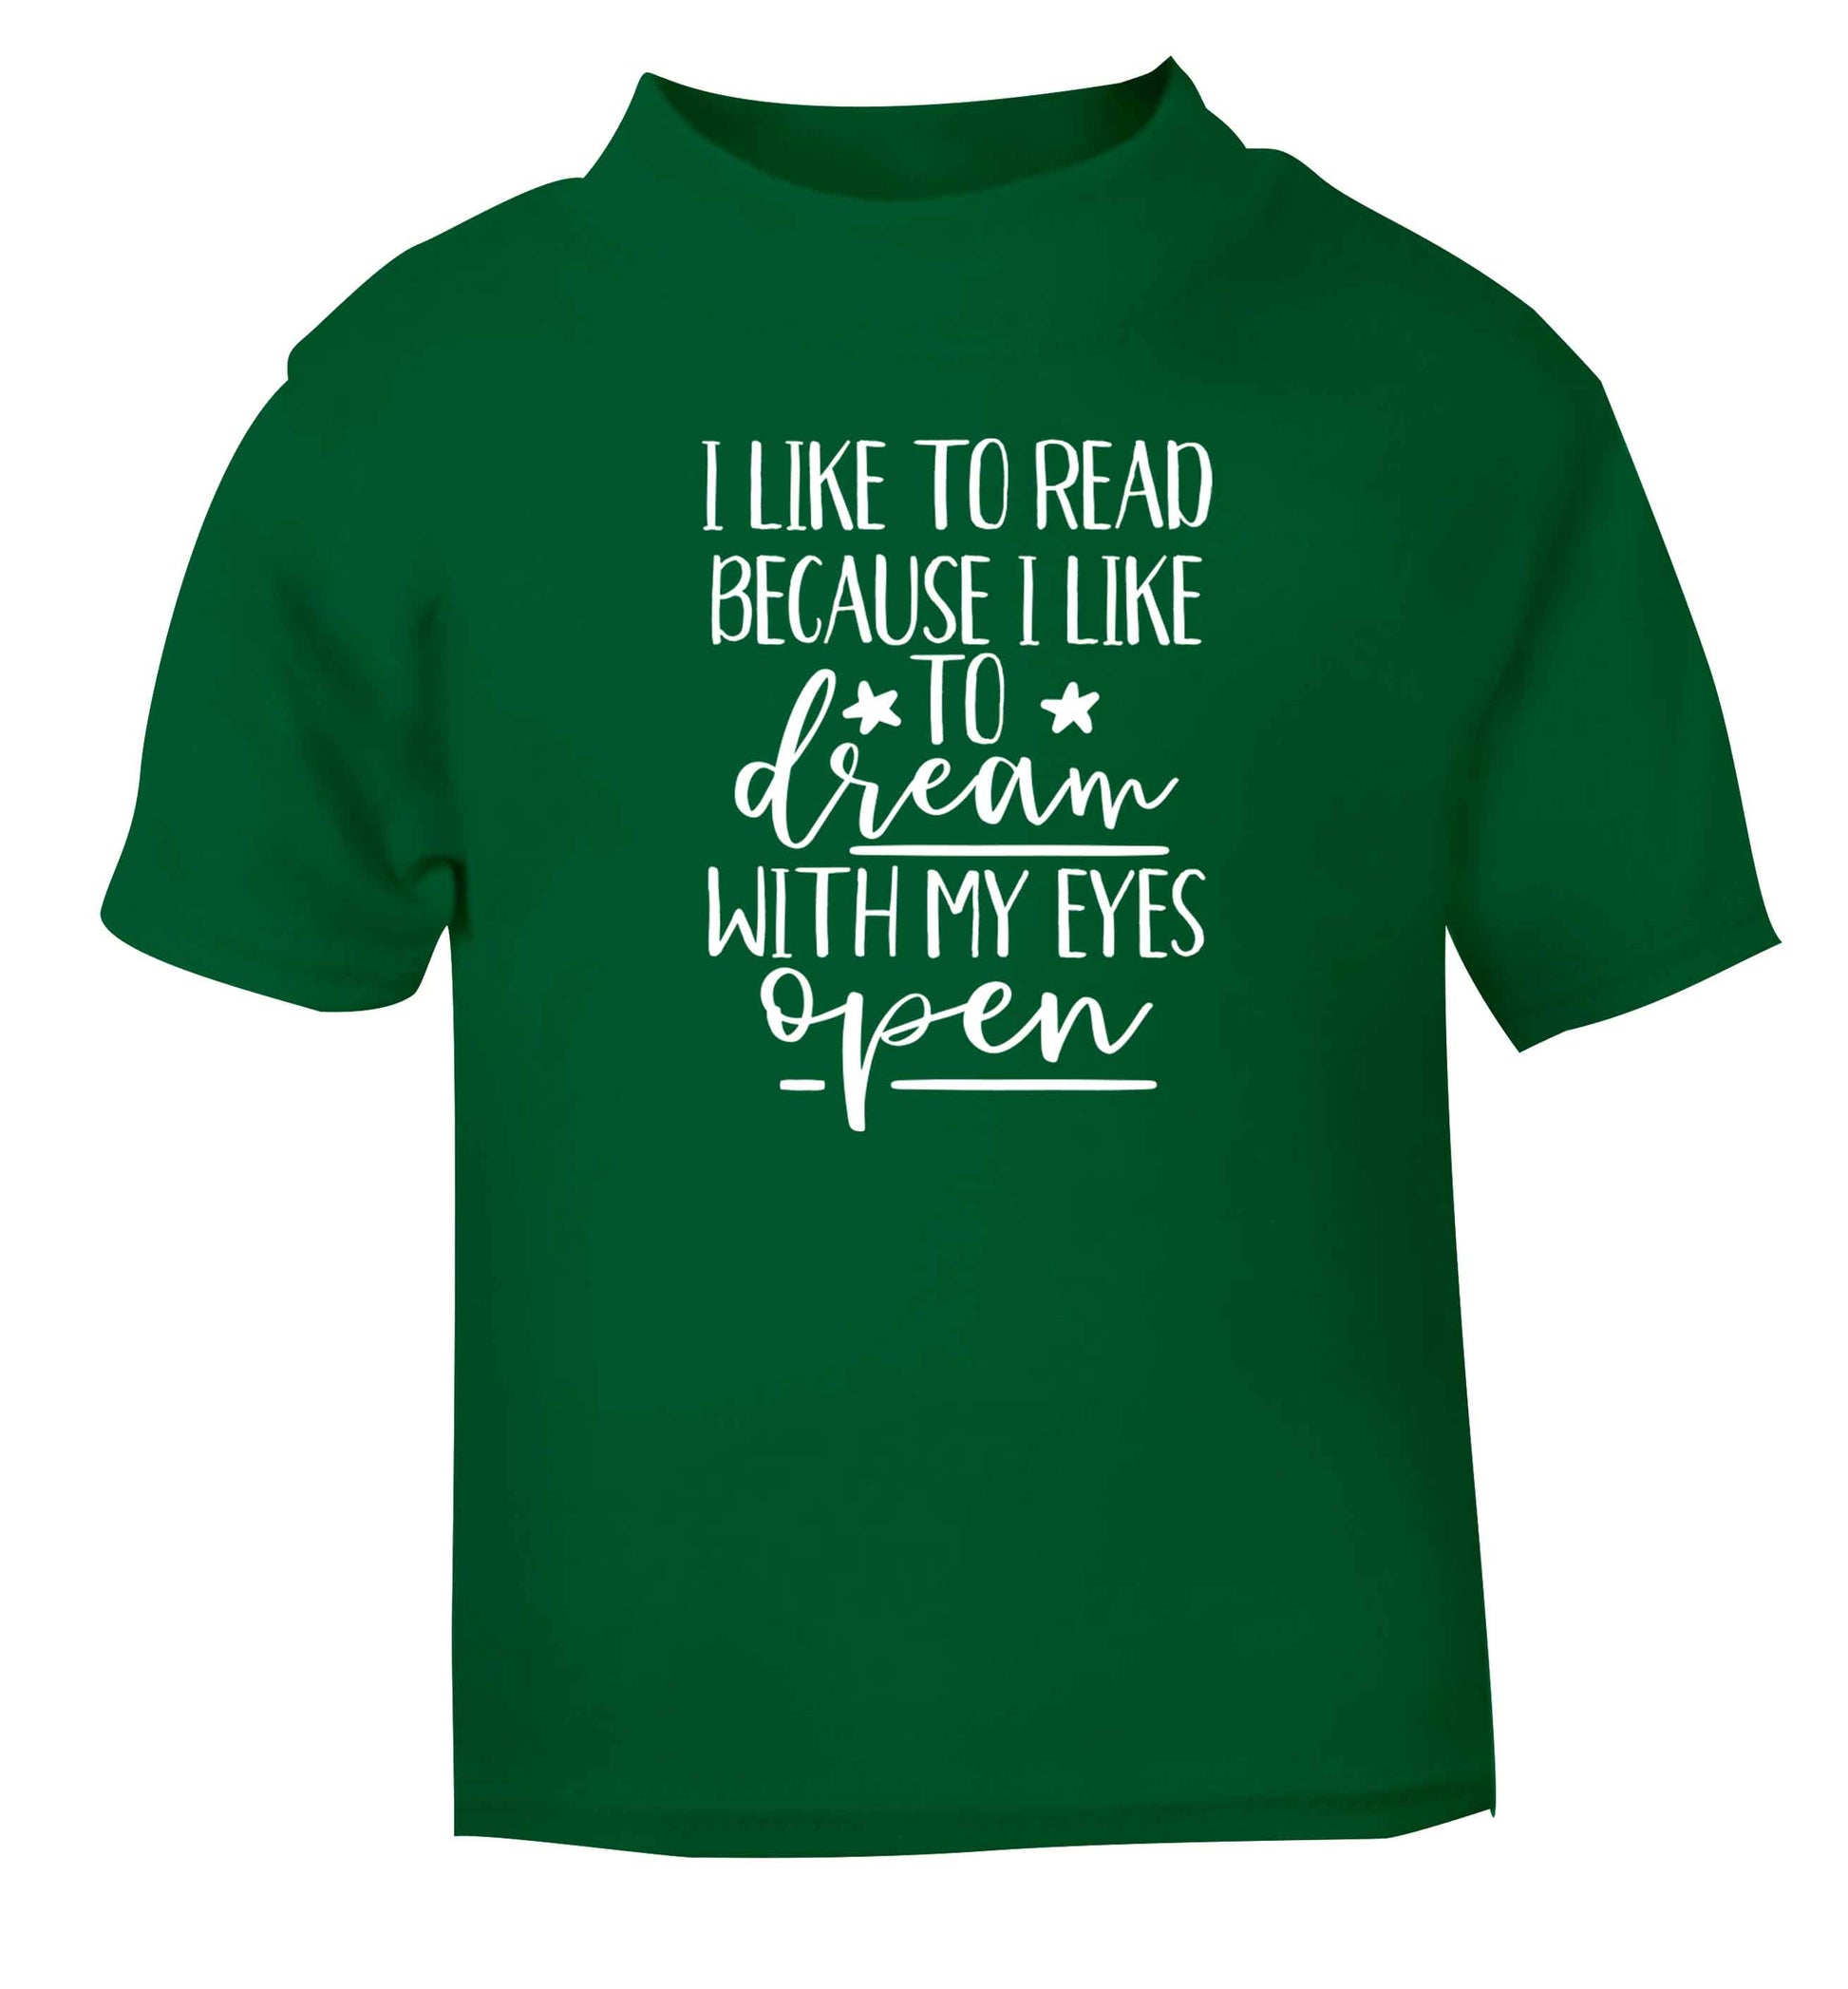 I like to read because I like to dream with my eyes open green Baby Toddler Tshirt 2 Years